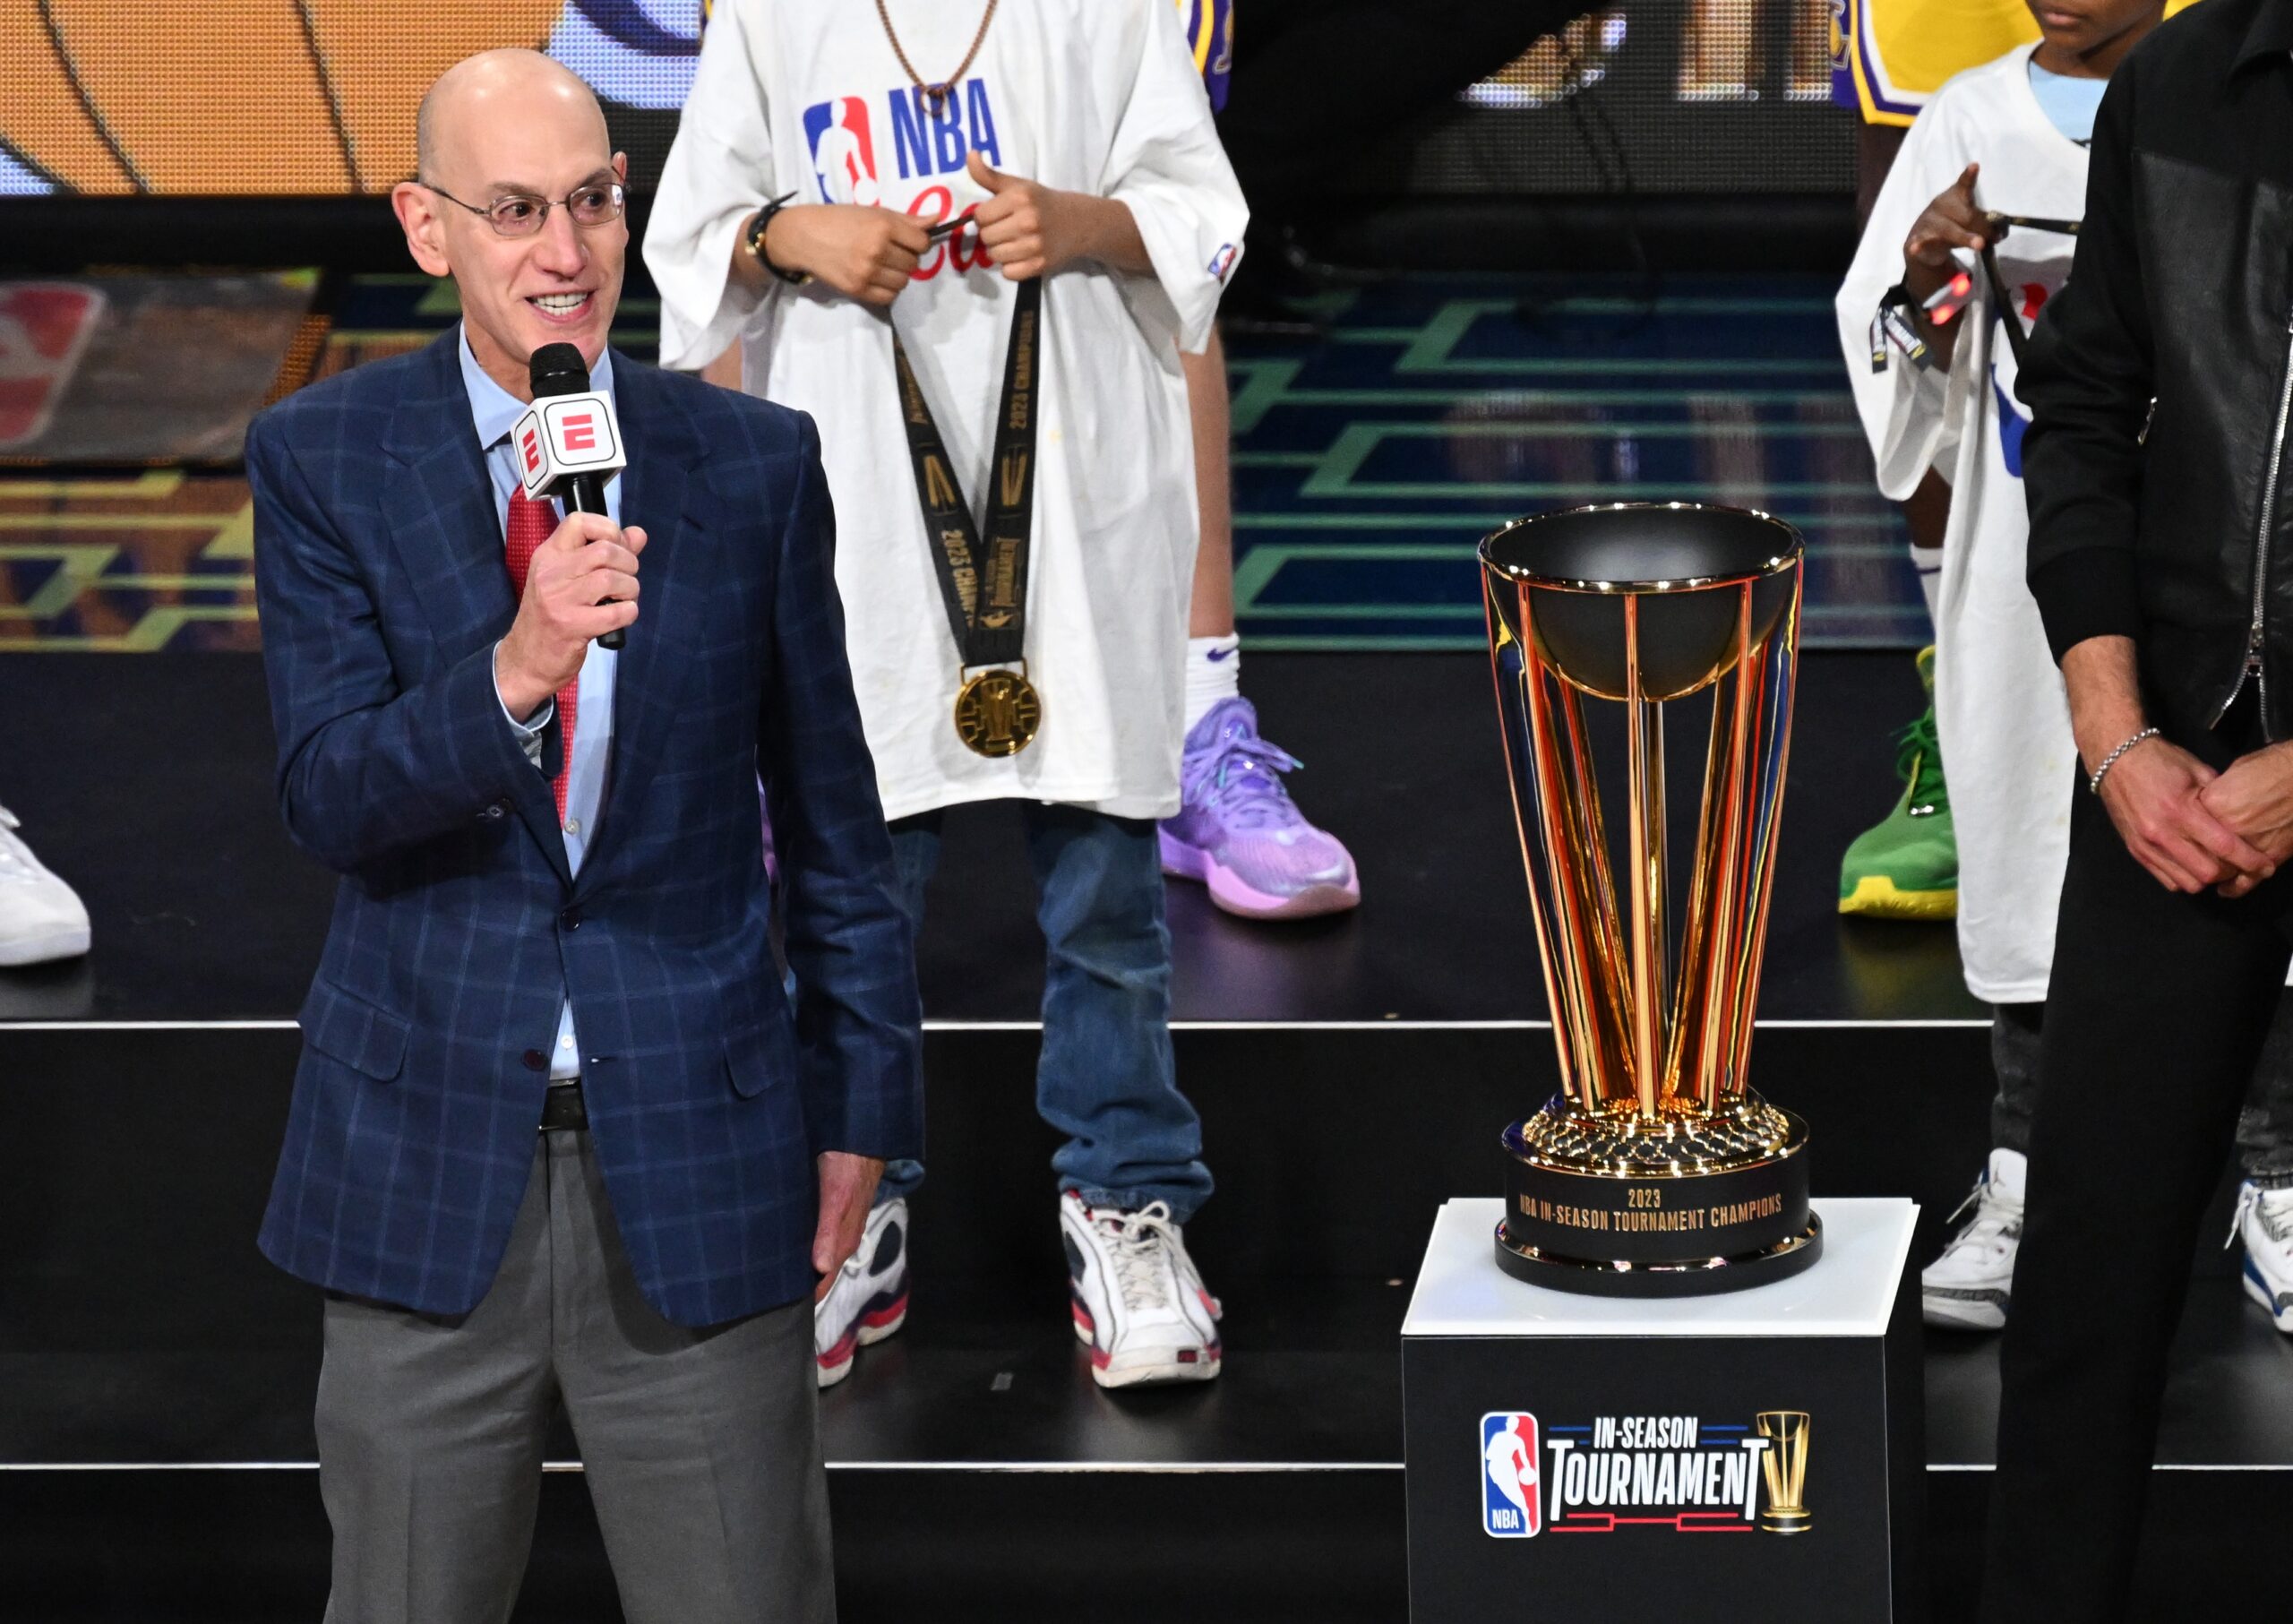 NBA commissioner Adam Silver presents the NBA Cup to the Los Angeles Lakers after winning the NBA In-Season Tournament Championship game against the Indiana Pacers at T-Mobile Arena.